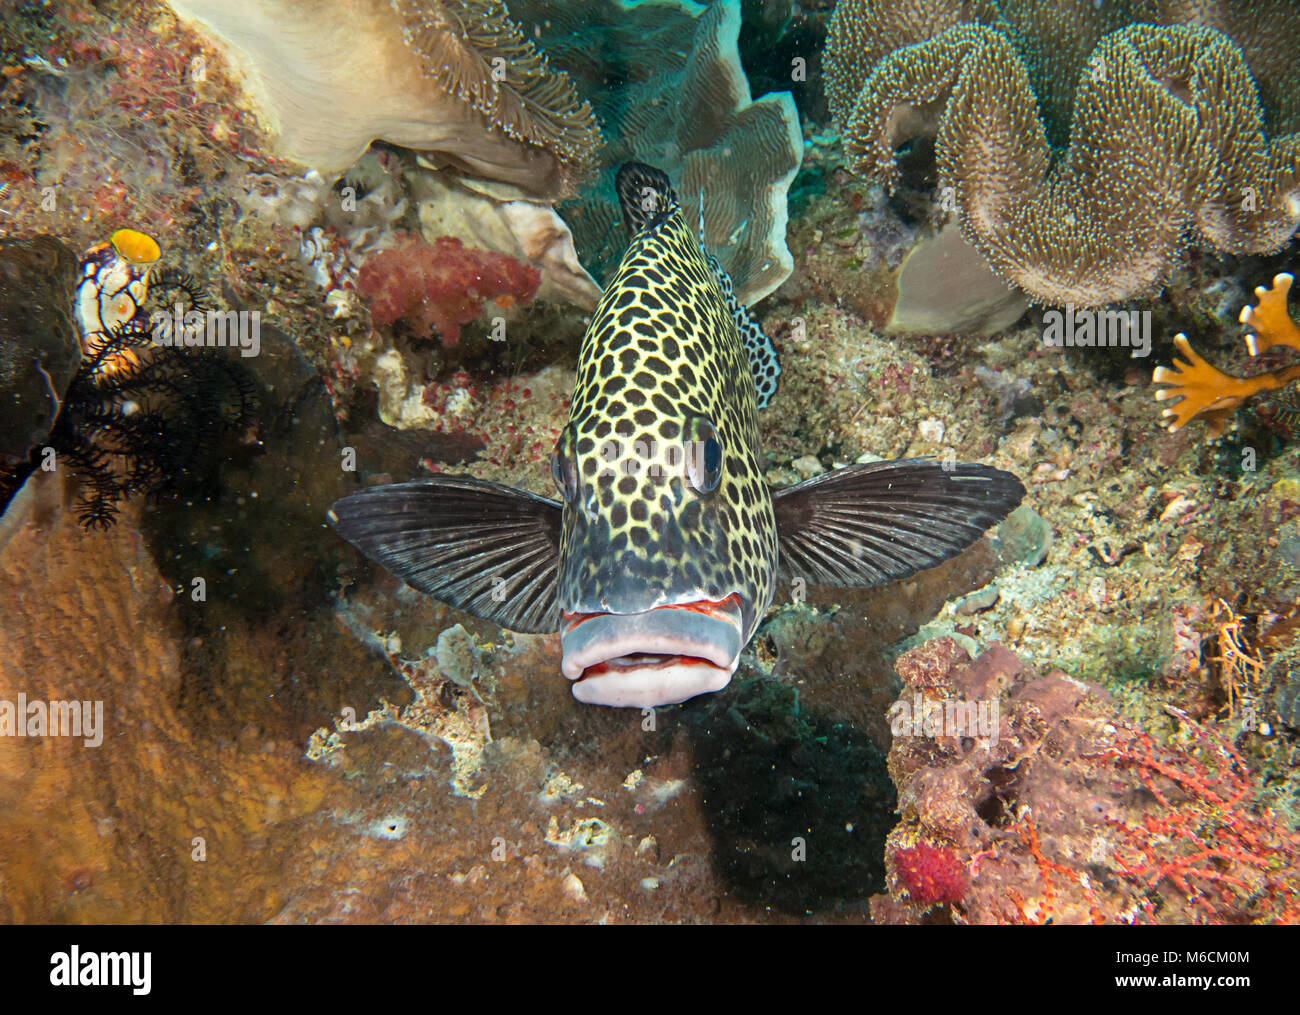 Many spotted sweetlips or harlequin sweetlips ( Plectorhinchus chaetodonoides ) at cleaning station of Bali Stock Photo